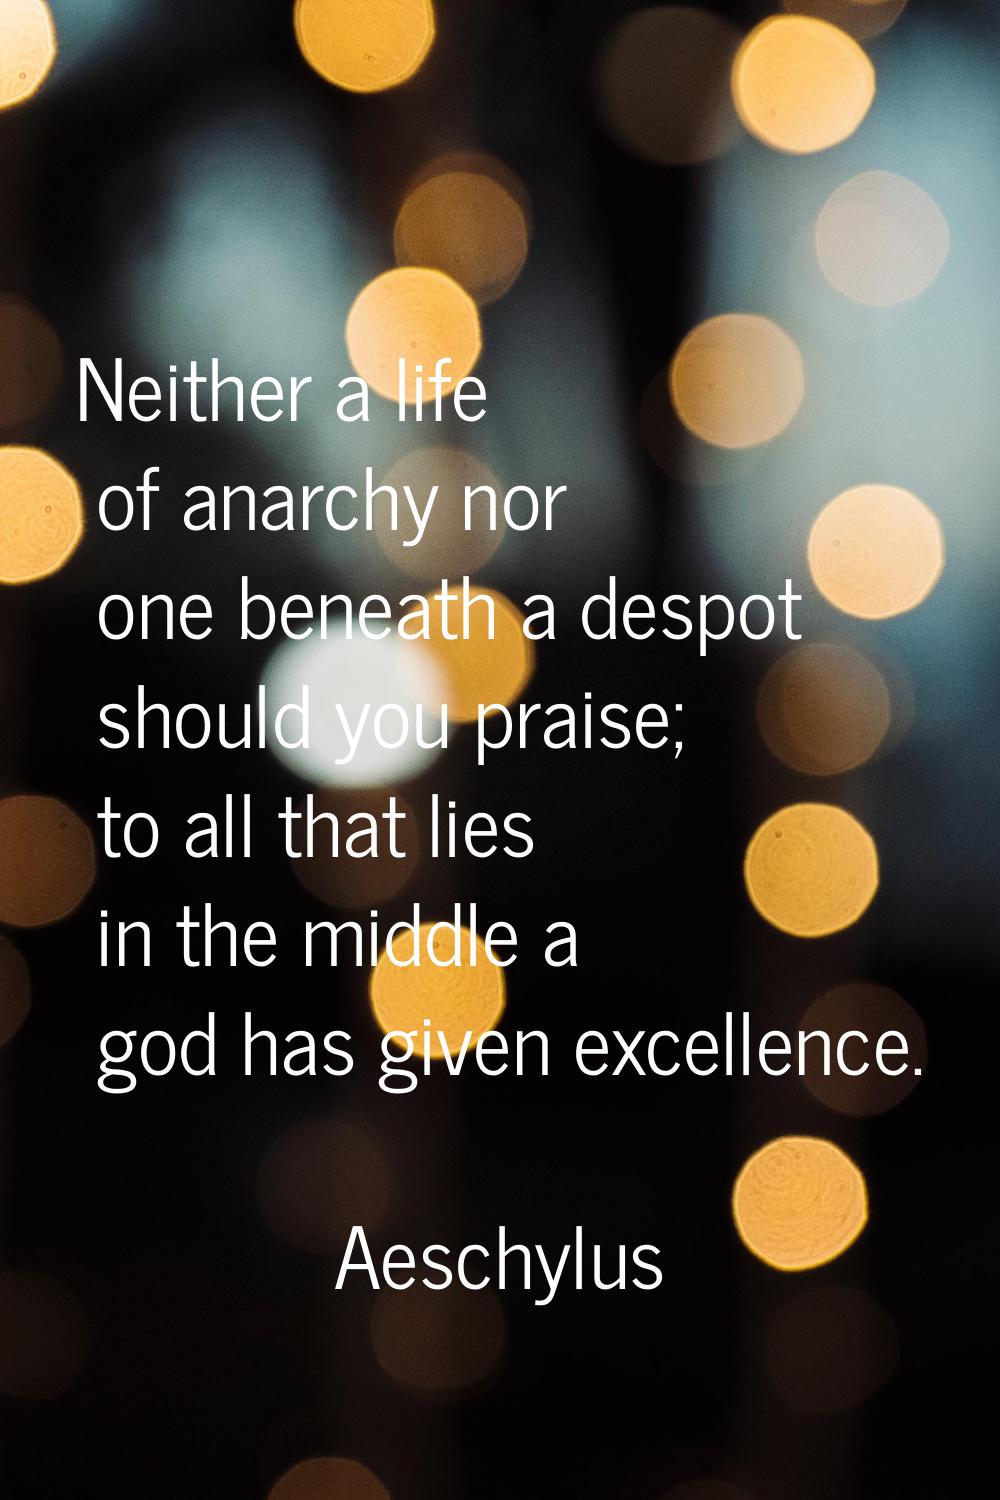 Neither a life of anarchy nor one beneath a despot should you praise; to all that lies in the middl